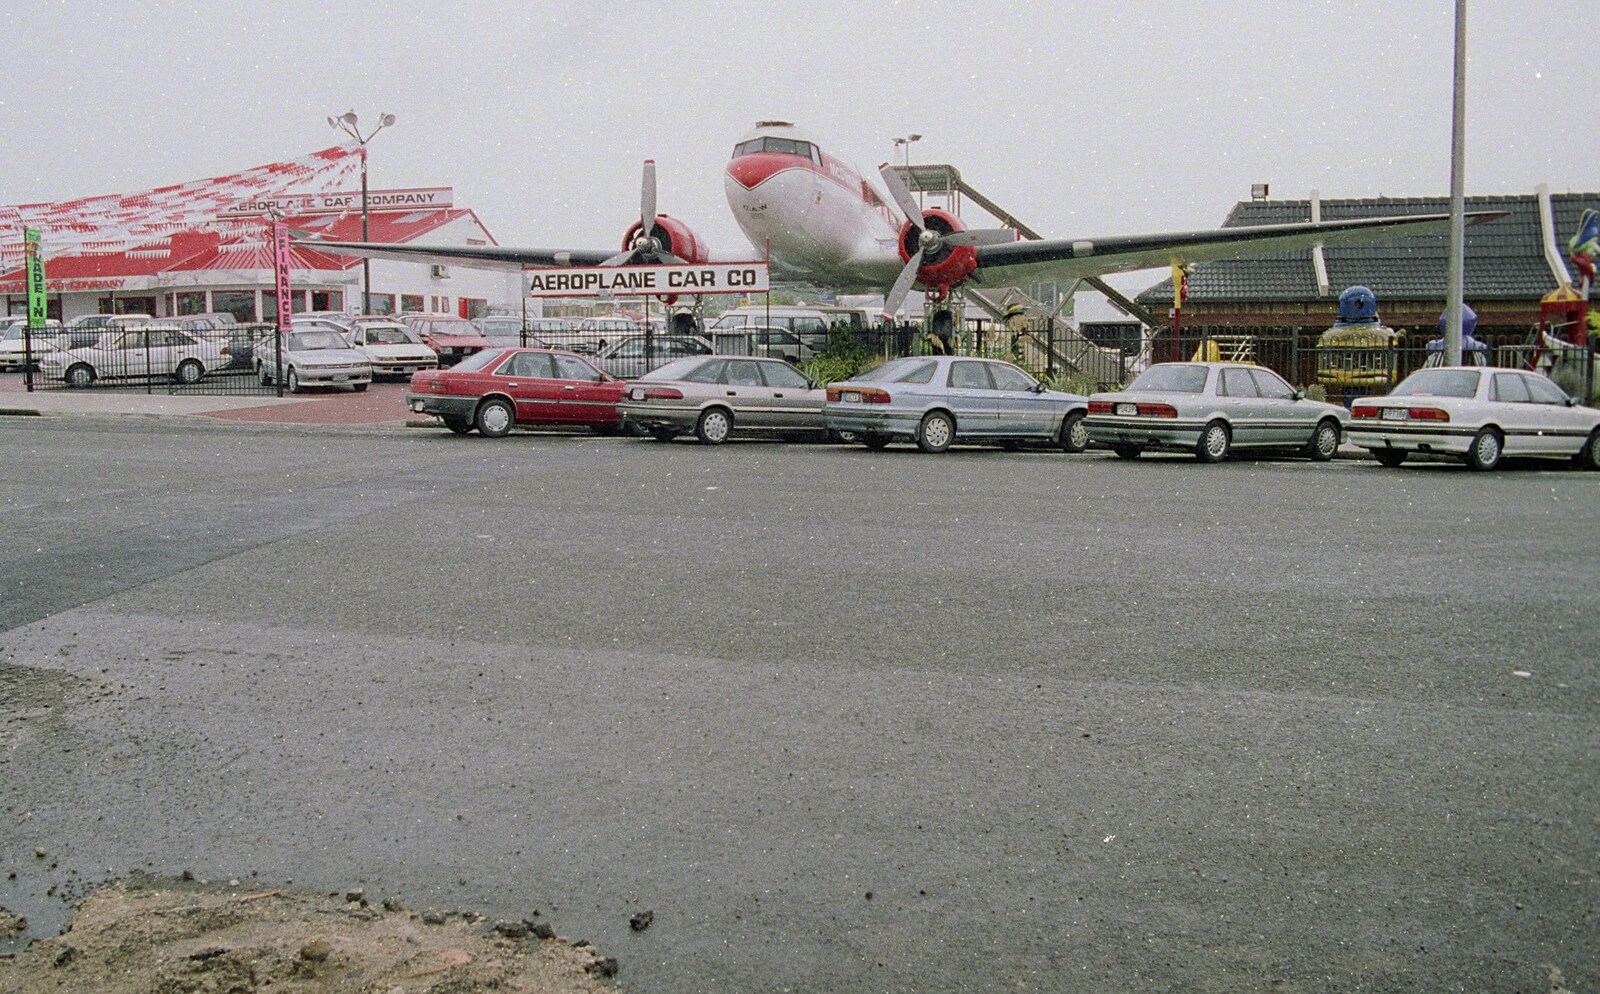 The Aeroplane Car Company, with a DC-3 from A Road-trip Through Rotorua to Palmerston, North Island, New Zealand - 27th November 1992